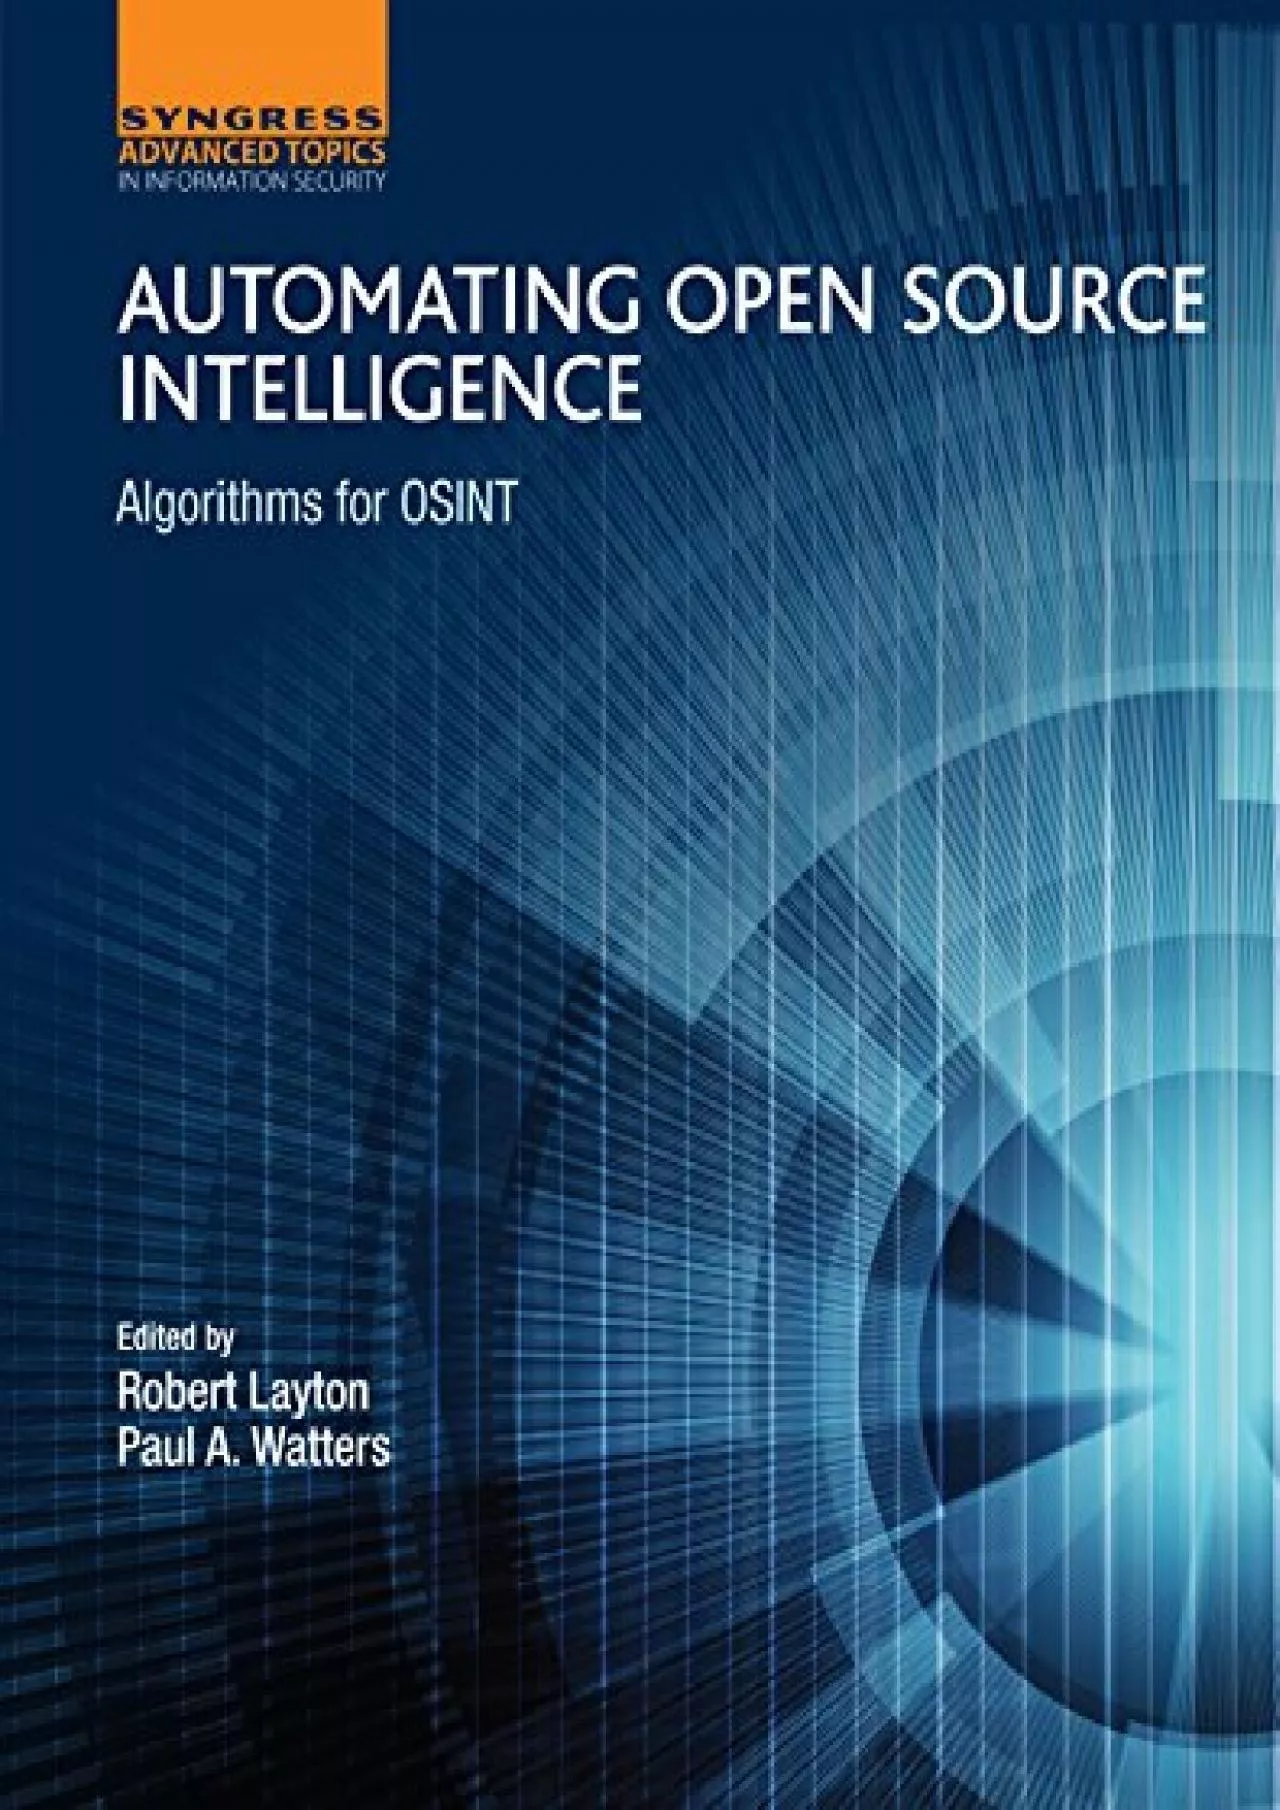 (EBOOK)-Automating Open Source Intelligence: Algorithms for OSINT (Computer Science Reviews